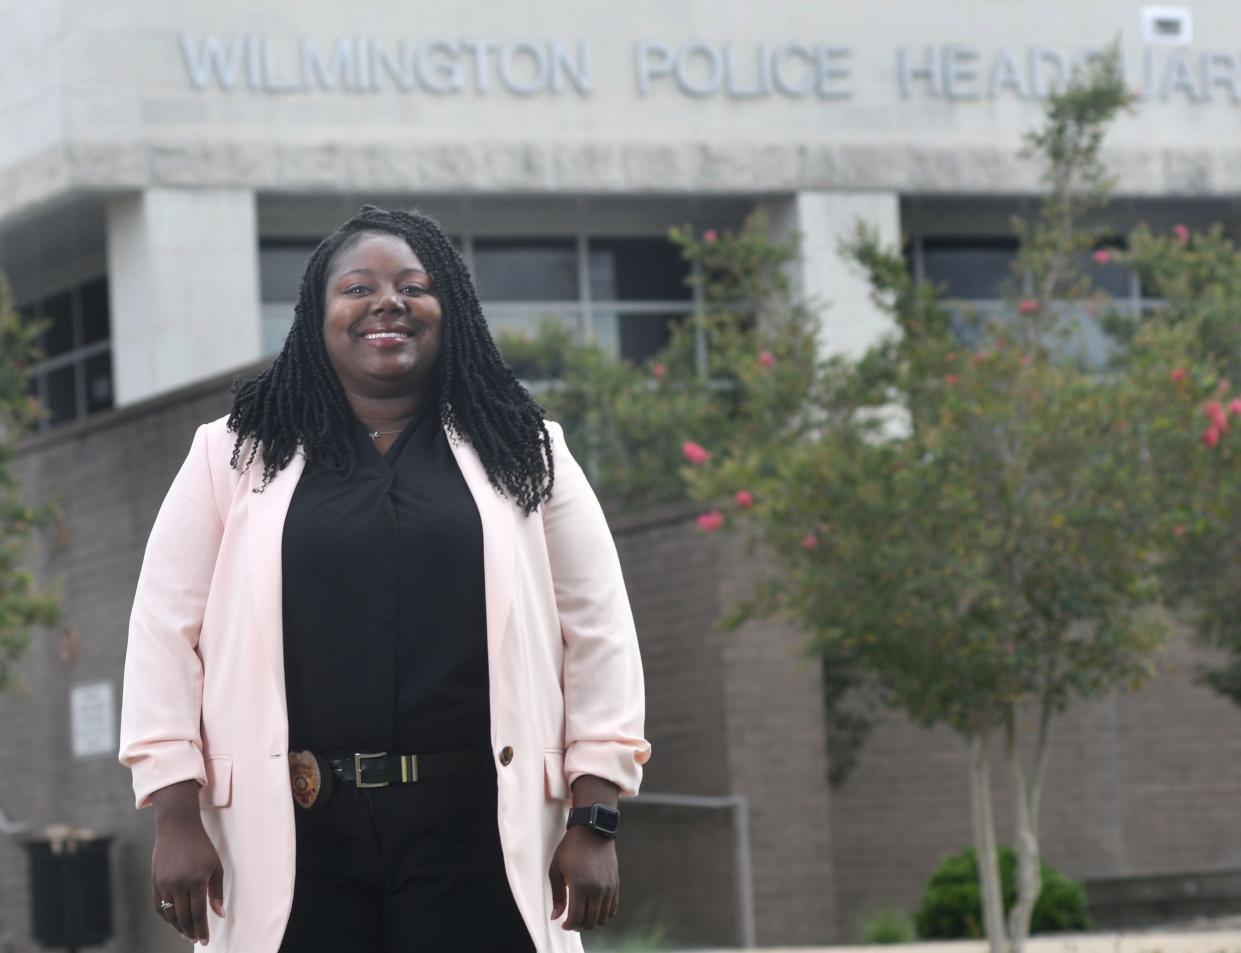 Aricka Sidbury, detective with the Wilmington Police Department, stands in front of the department headquarters in Wilmington, N.C., Monday, August 17, 2020. Sidbury is one of the 40 Under 40 honorees for 2020.